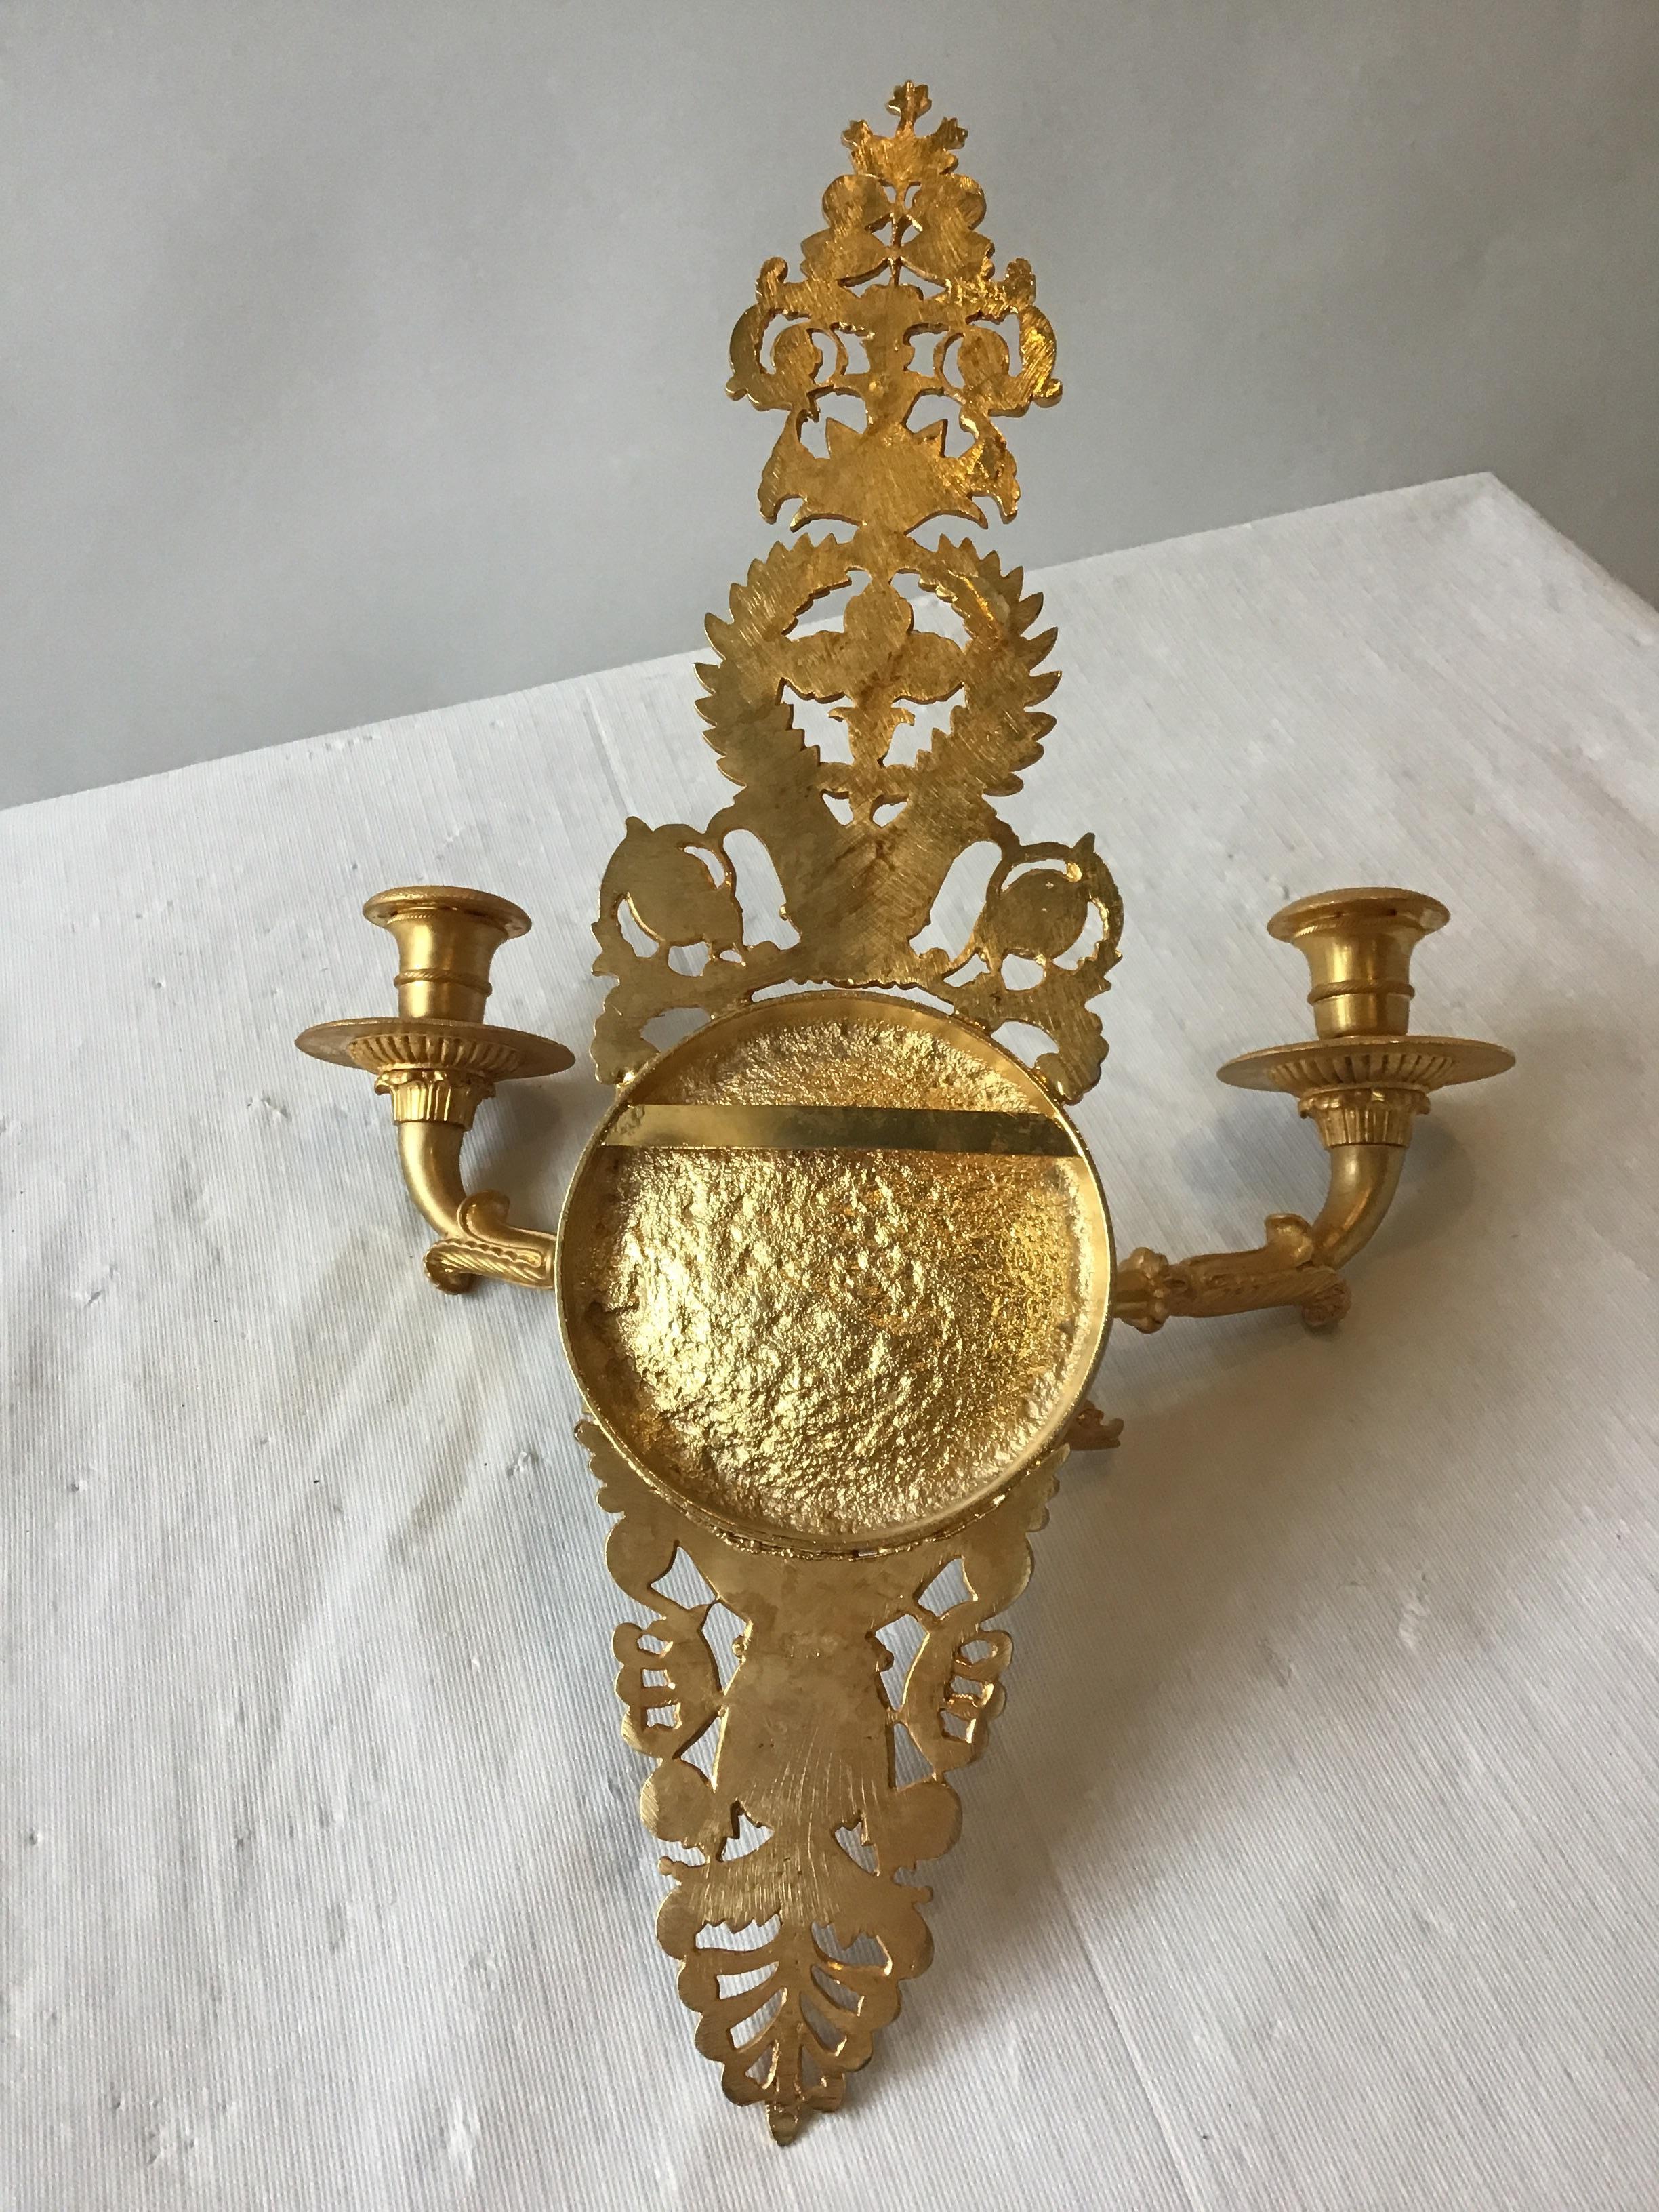 3 Versace Style Gold-Plated Lion Head Classical Sconces For Sale 5